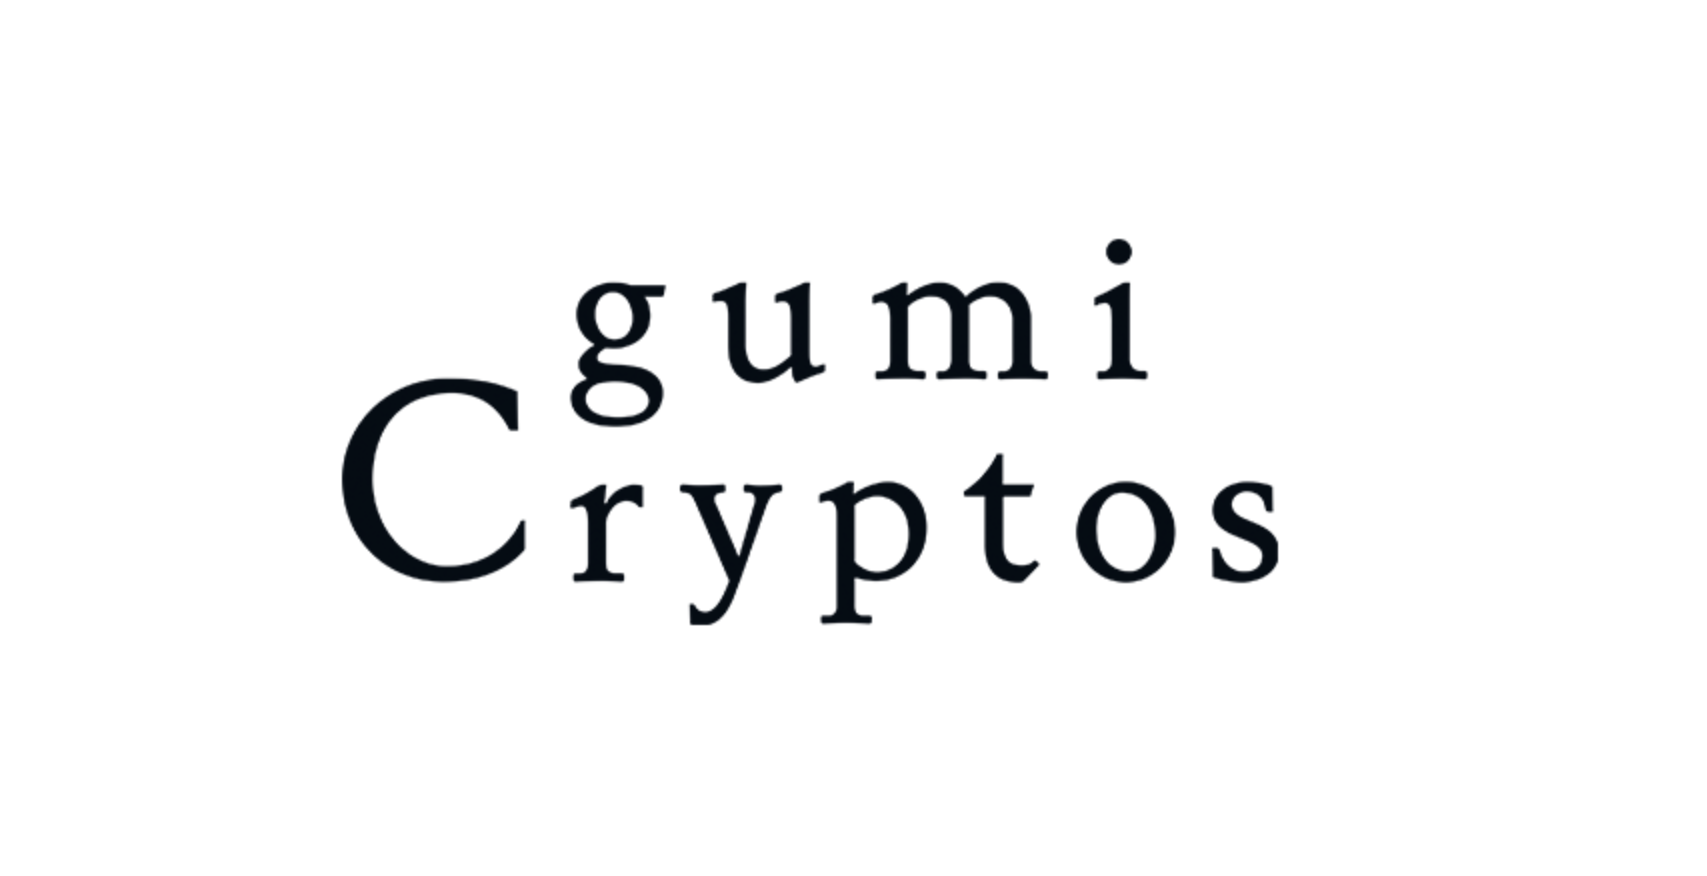 gumi Cryptos Capital (gCC) Completed Raising a $110M Early-Stage Fund to Invest in Blockchain Startups